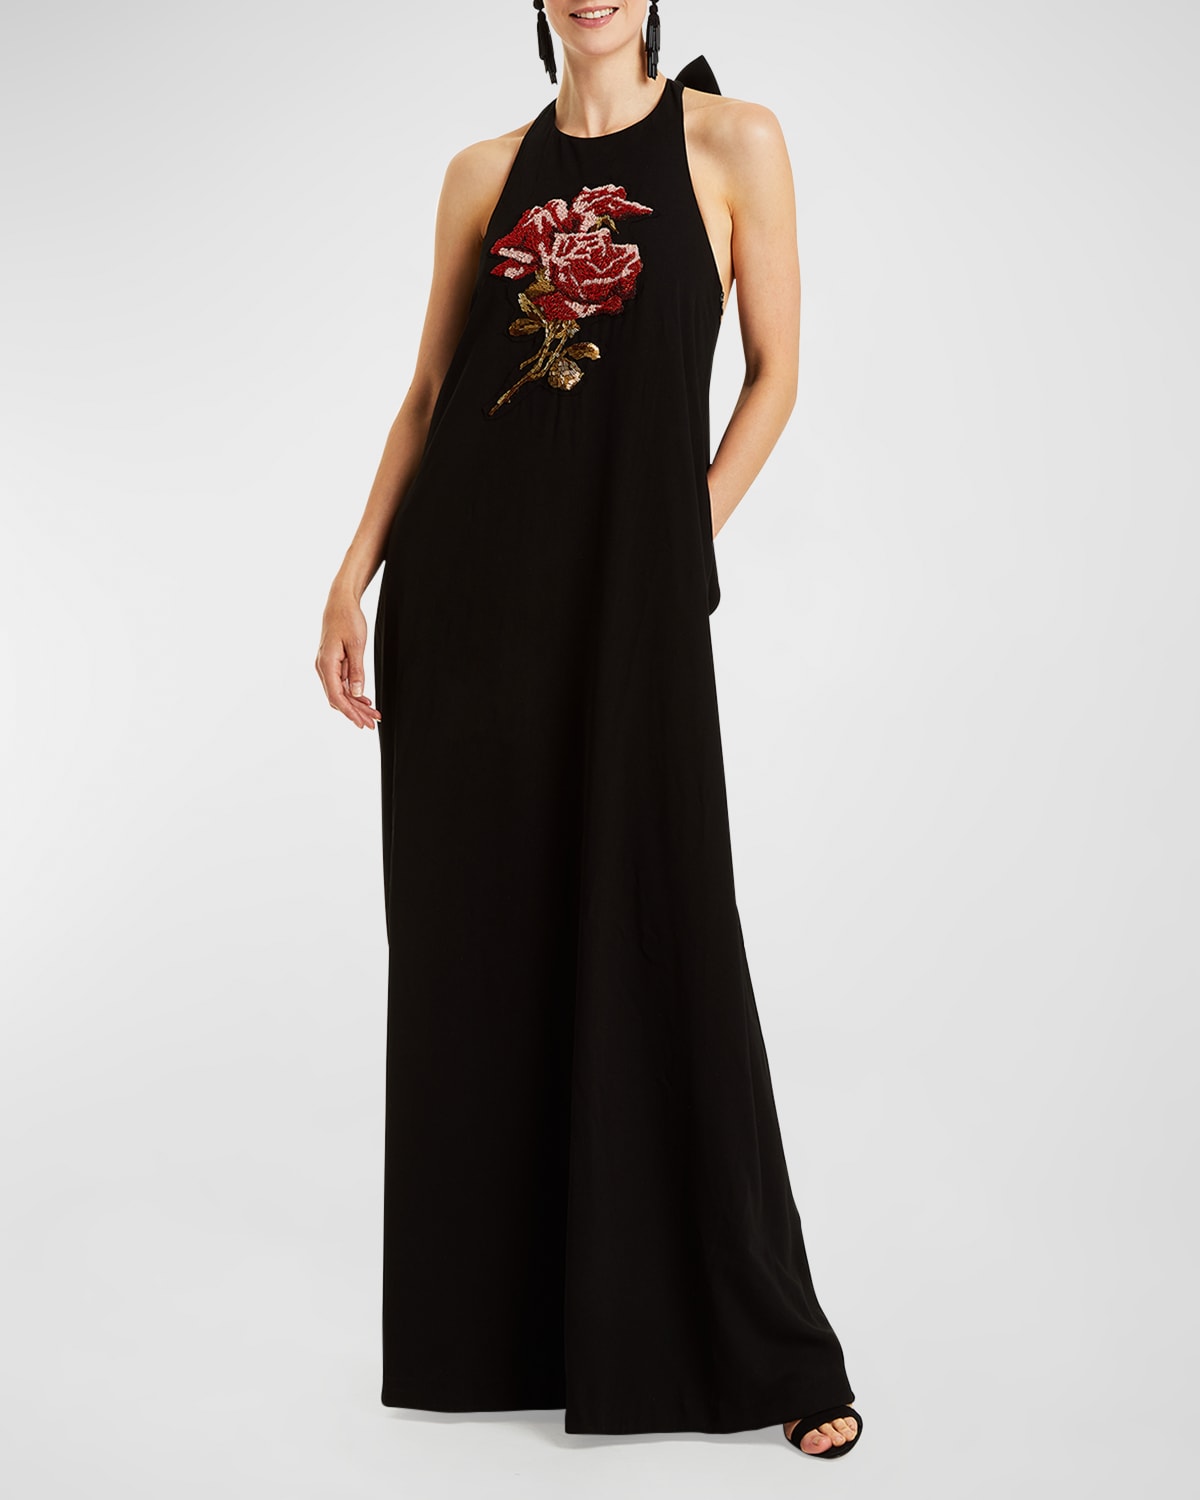 MESTIZA NEW YORK ADELINA FLORAL BEADED HALTER GOWN